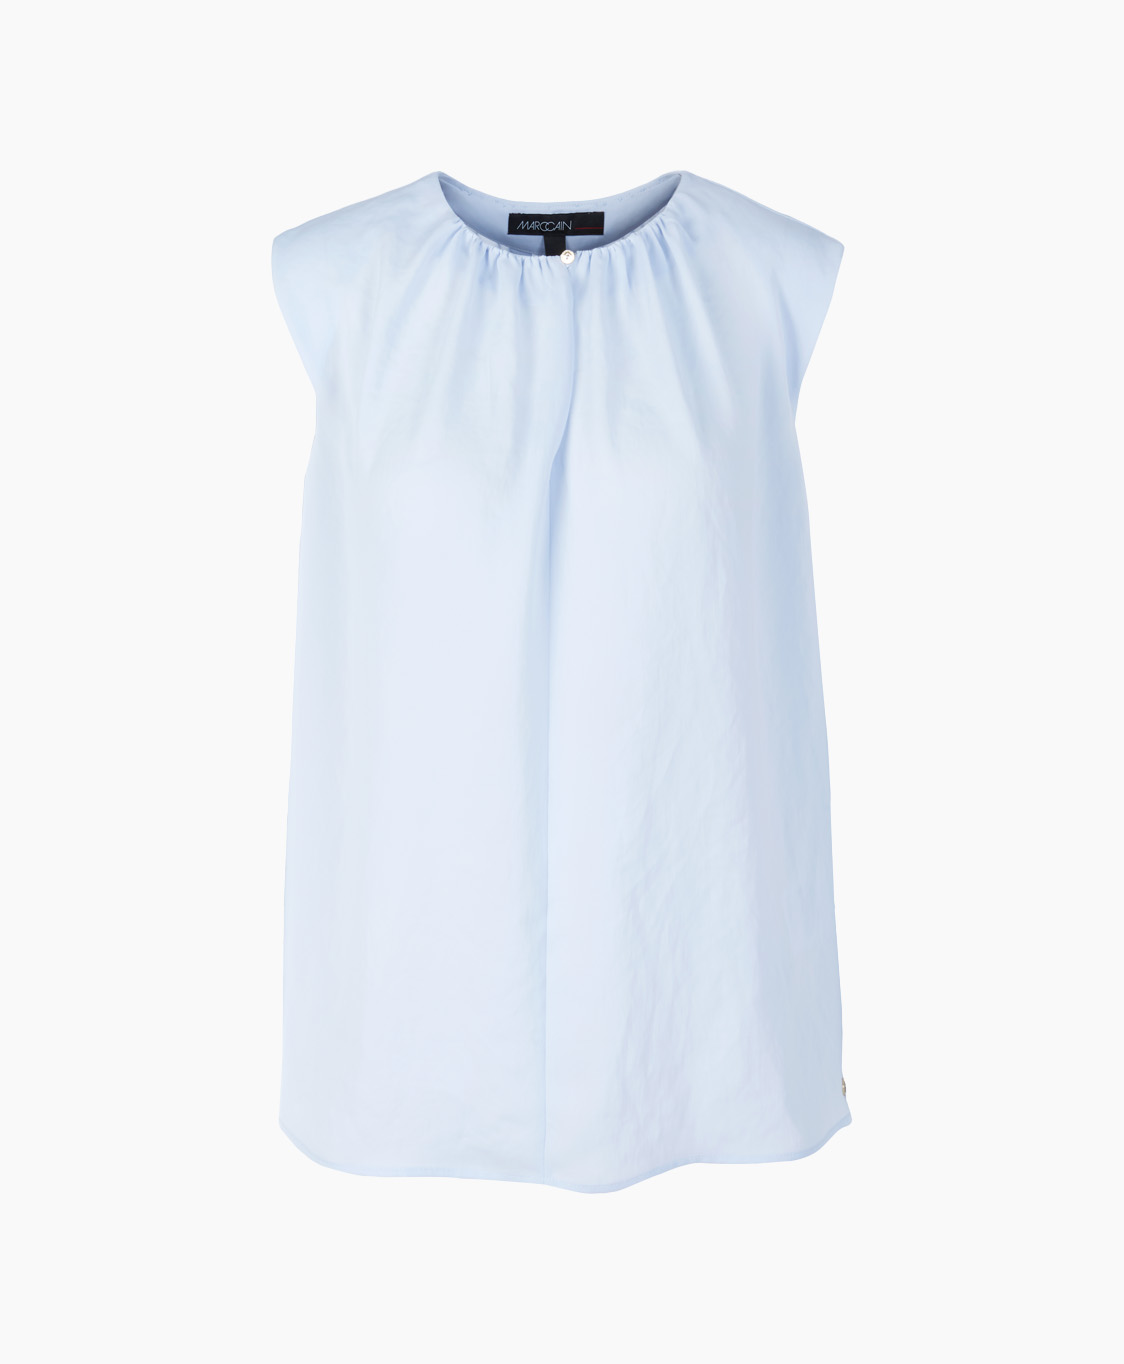 Marccain Collectie Top Uc 61.03 W39 Blauw